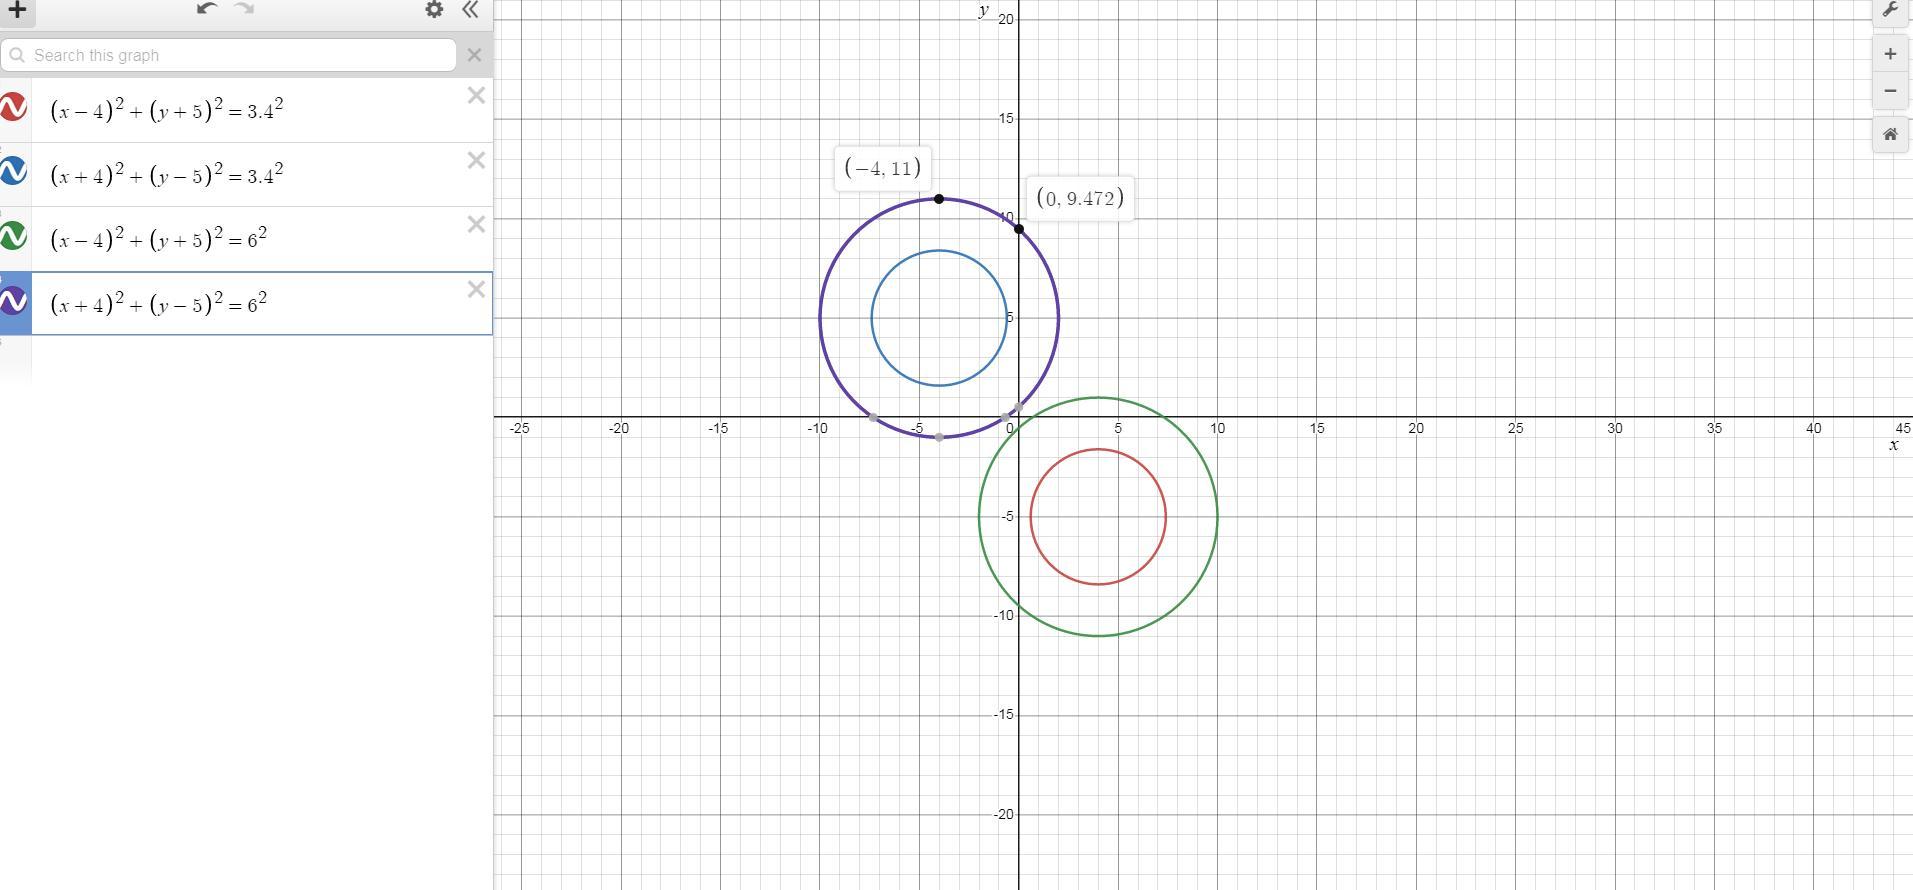 Which Equation Represents Circle A?